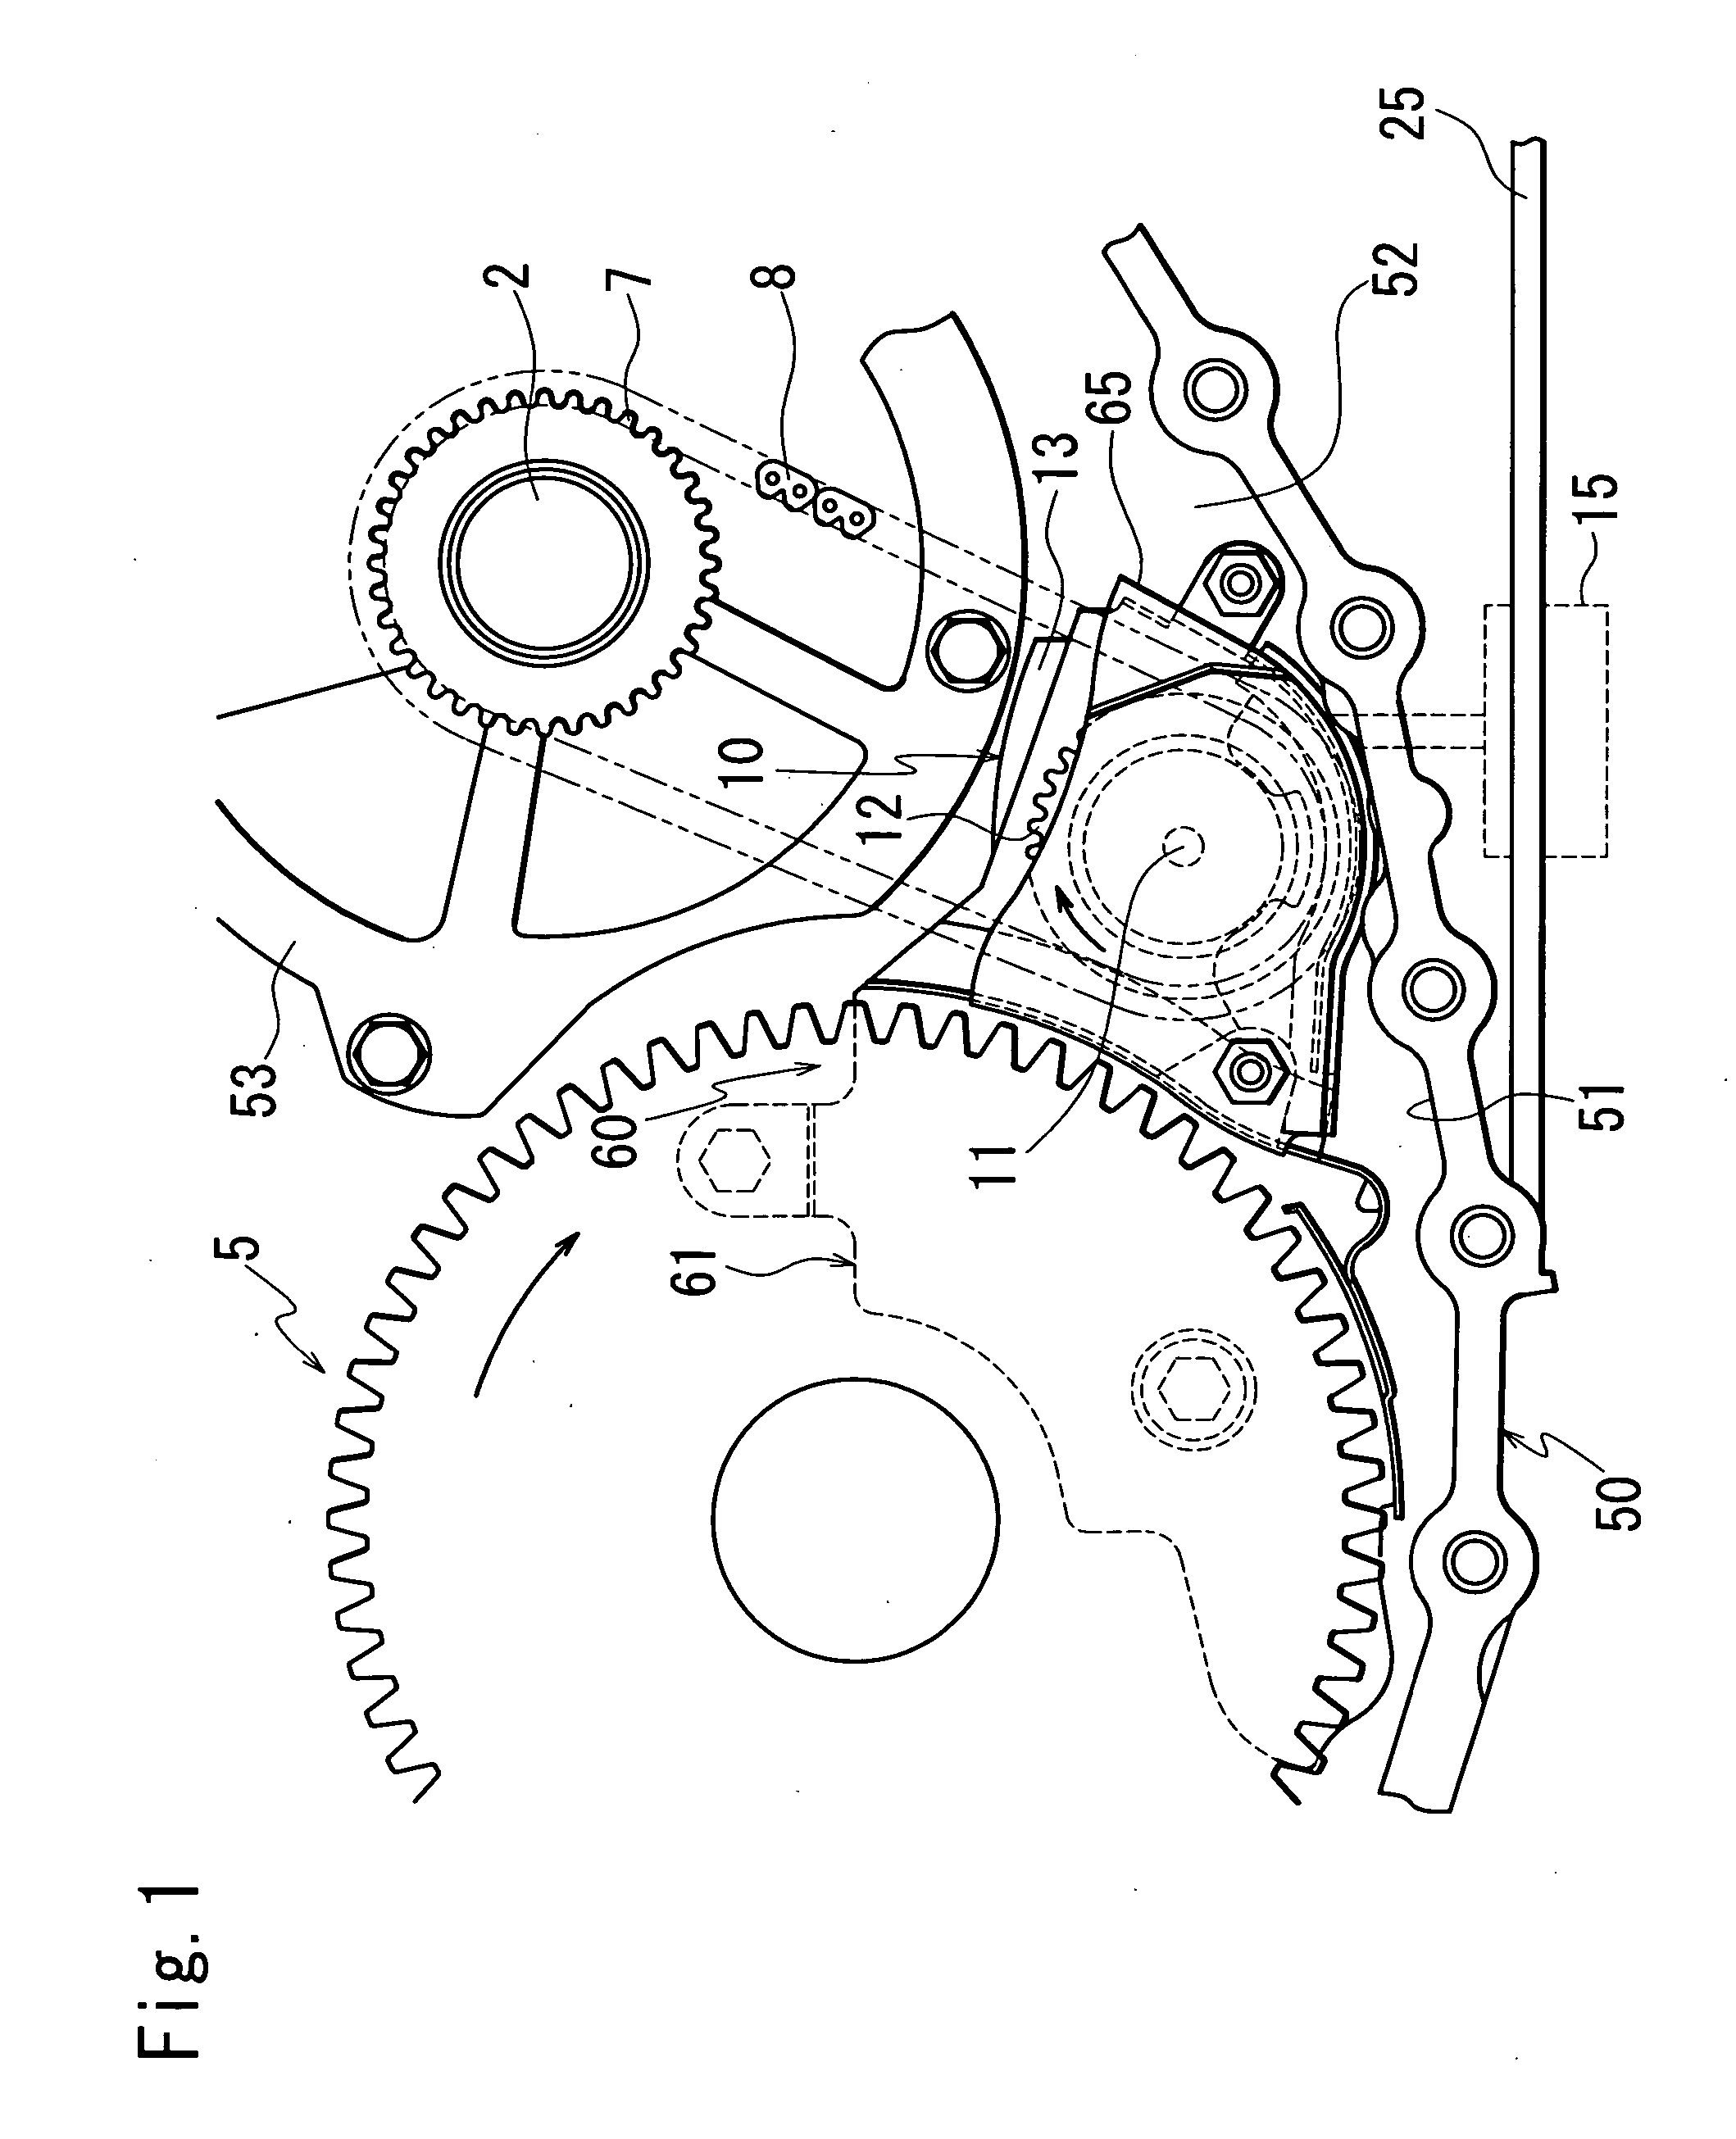 Oil separating structure of automatic transmission